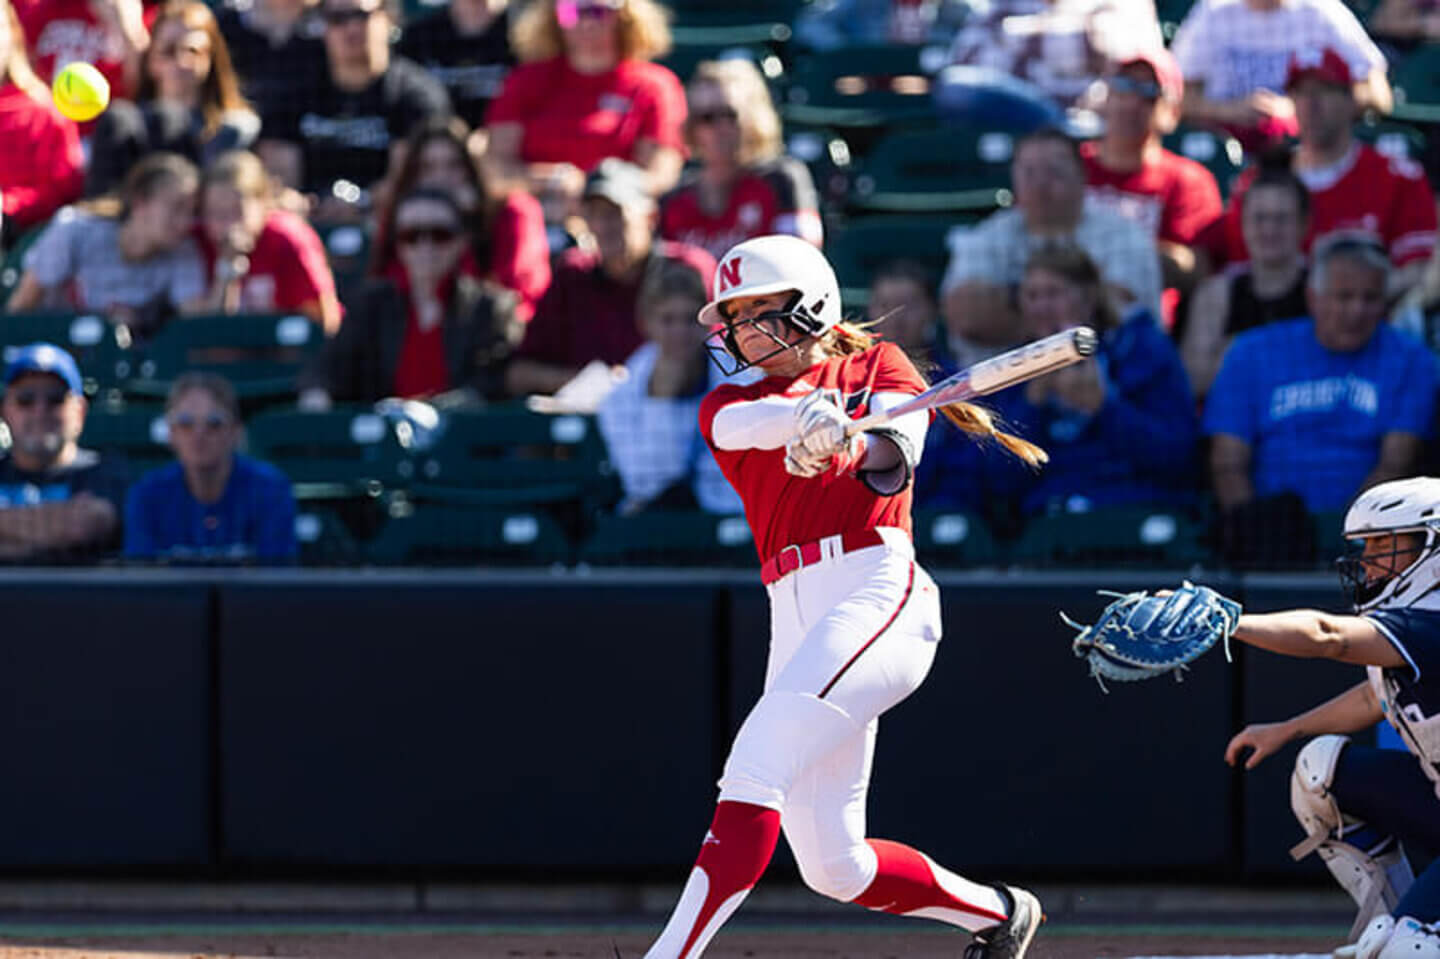 A Husker smashes a softball with a swing of her bat.